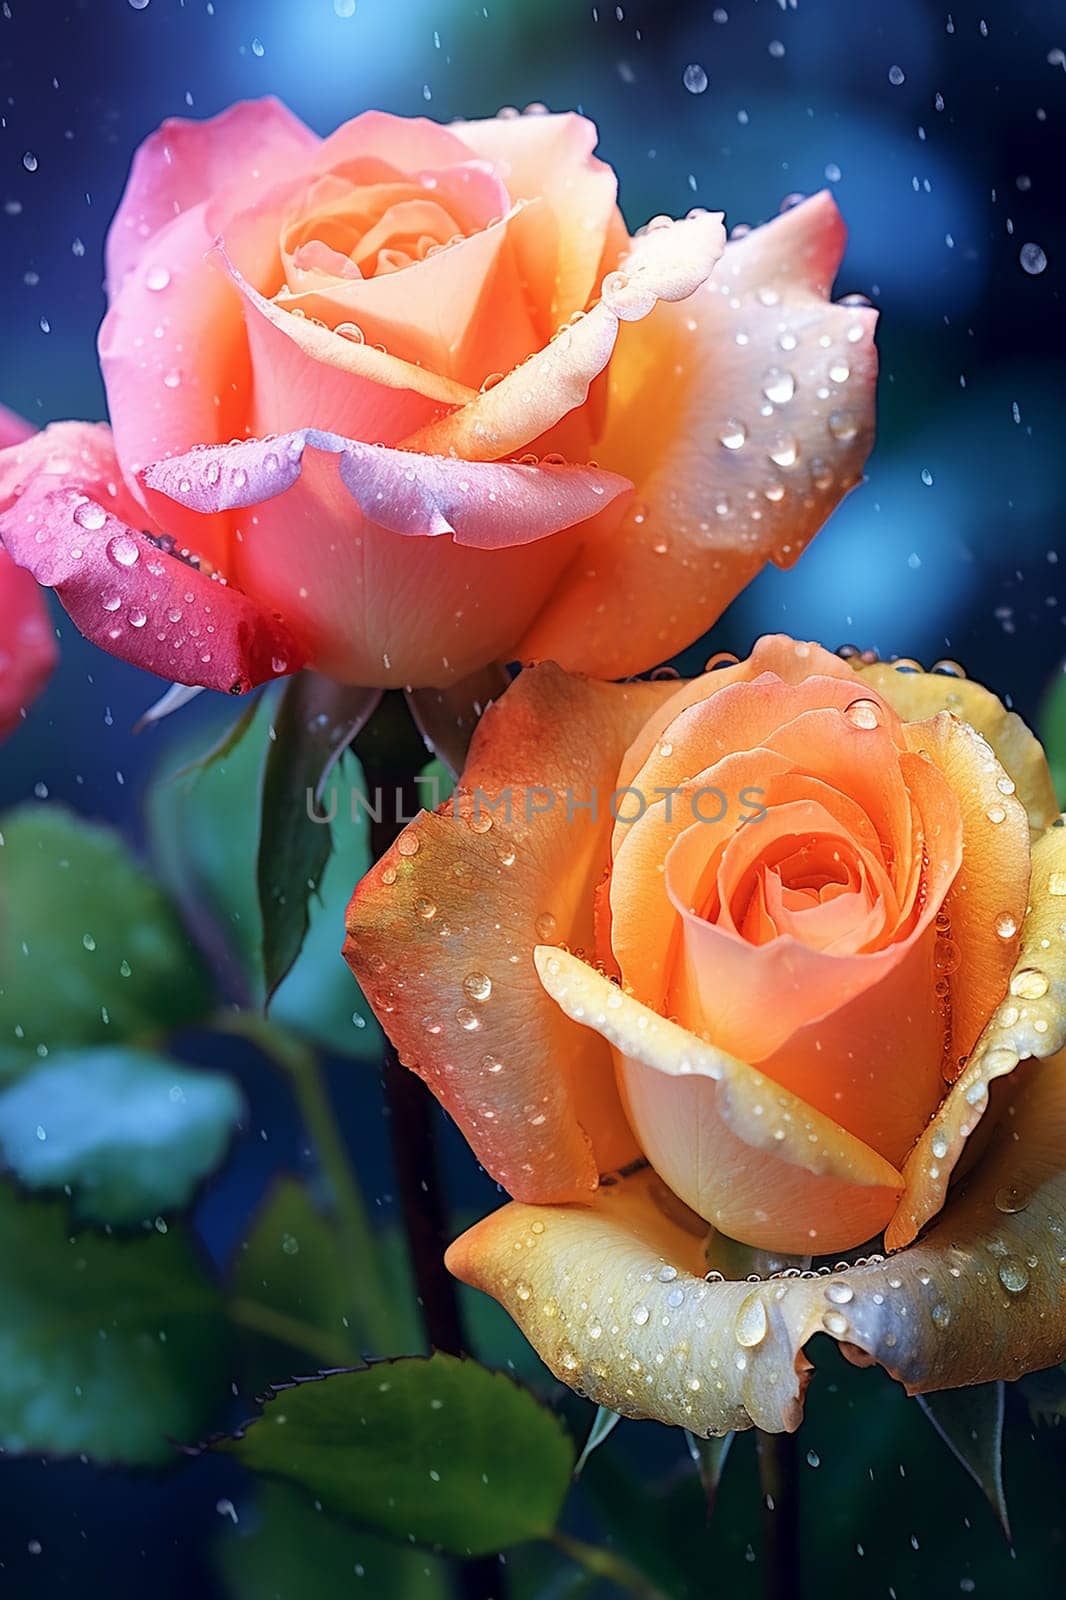 A couple of roses with rainbow color on petals, colorful flower